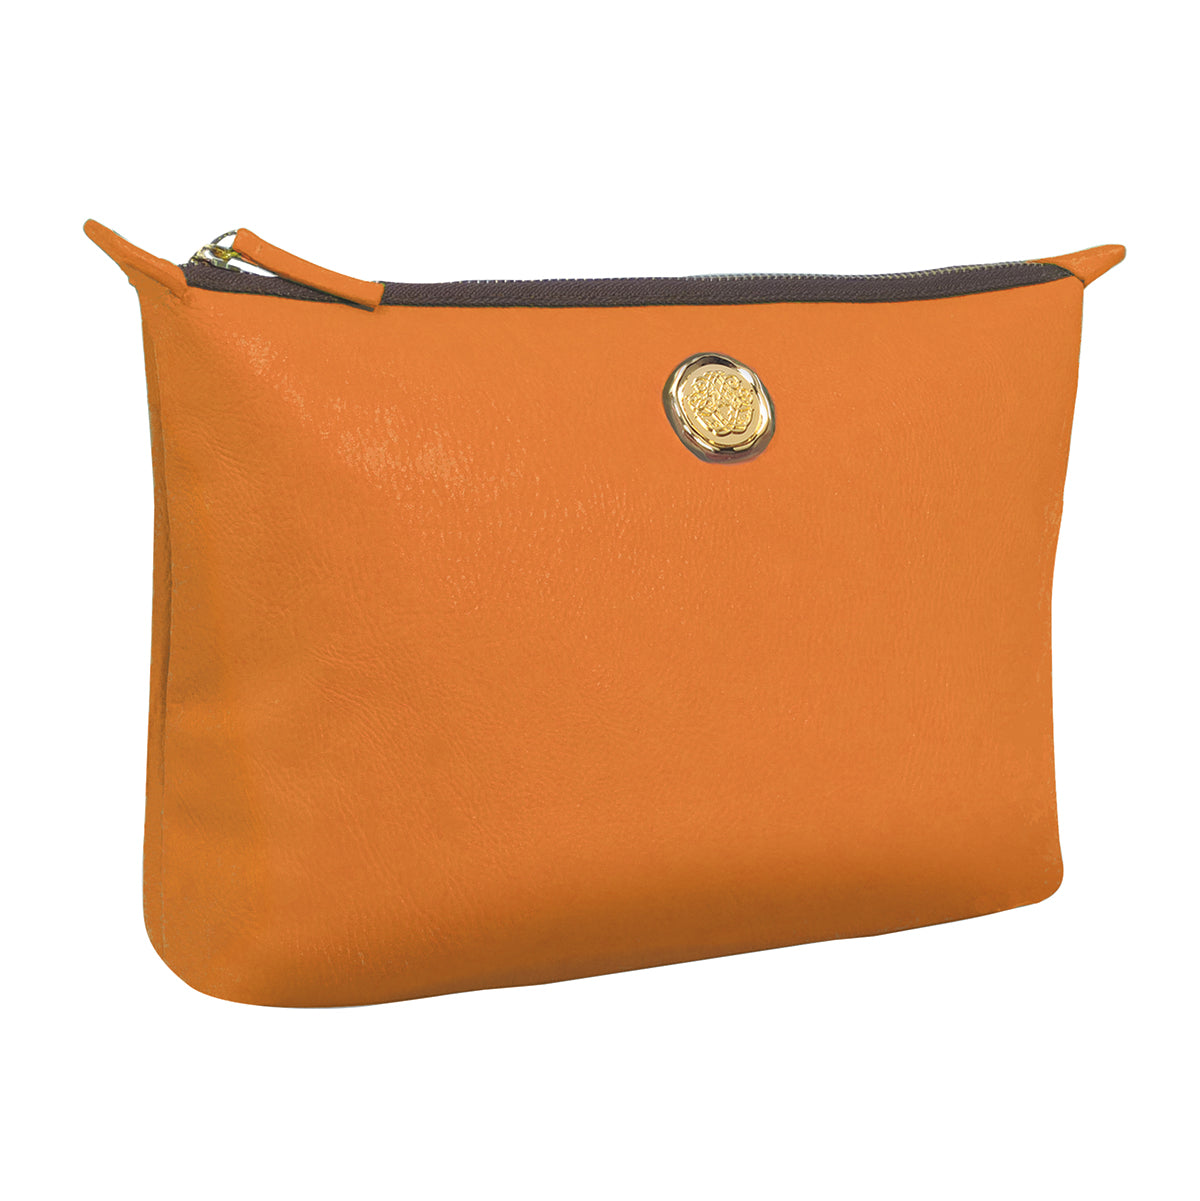 a small orange purse with a gold button.